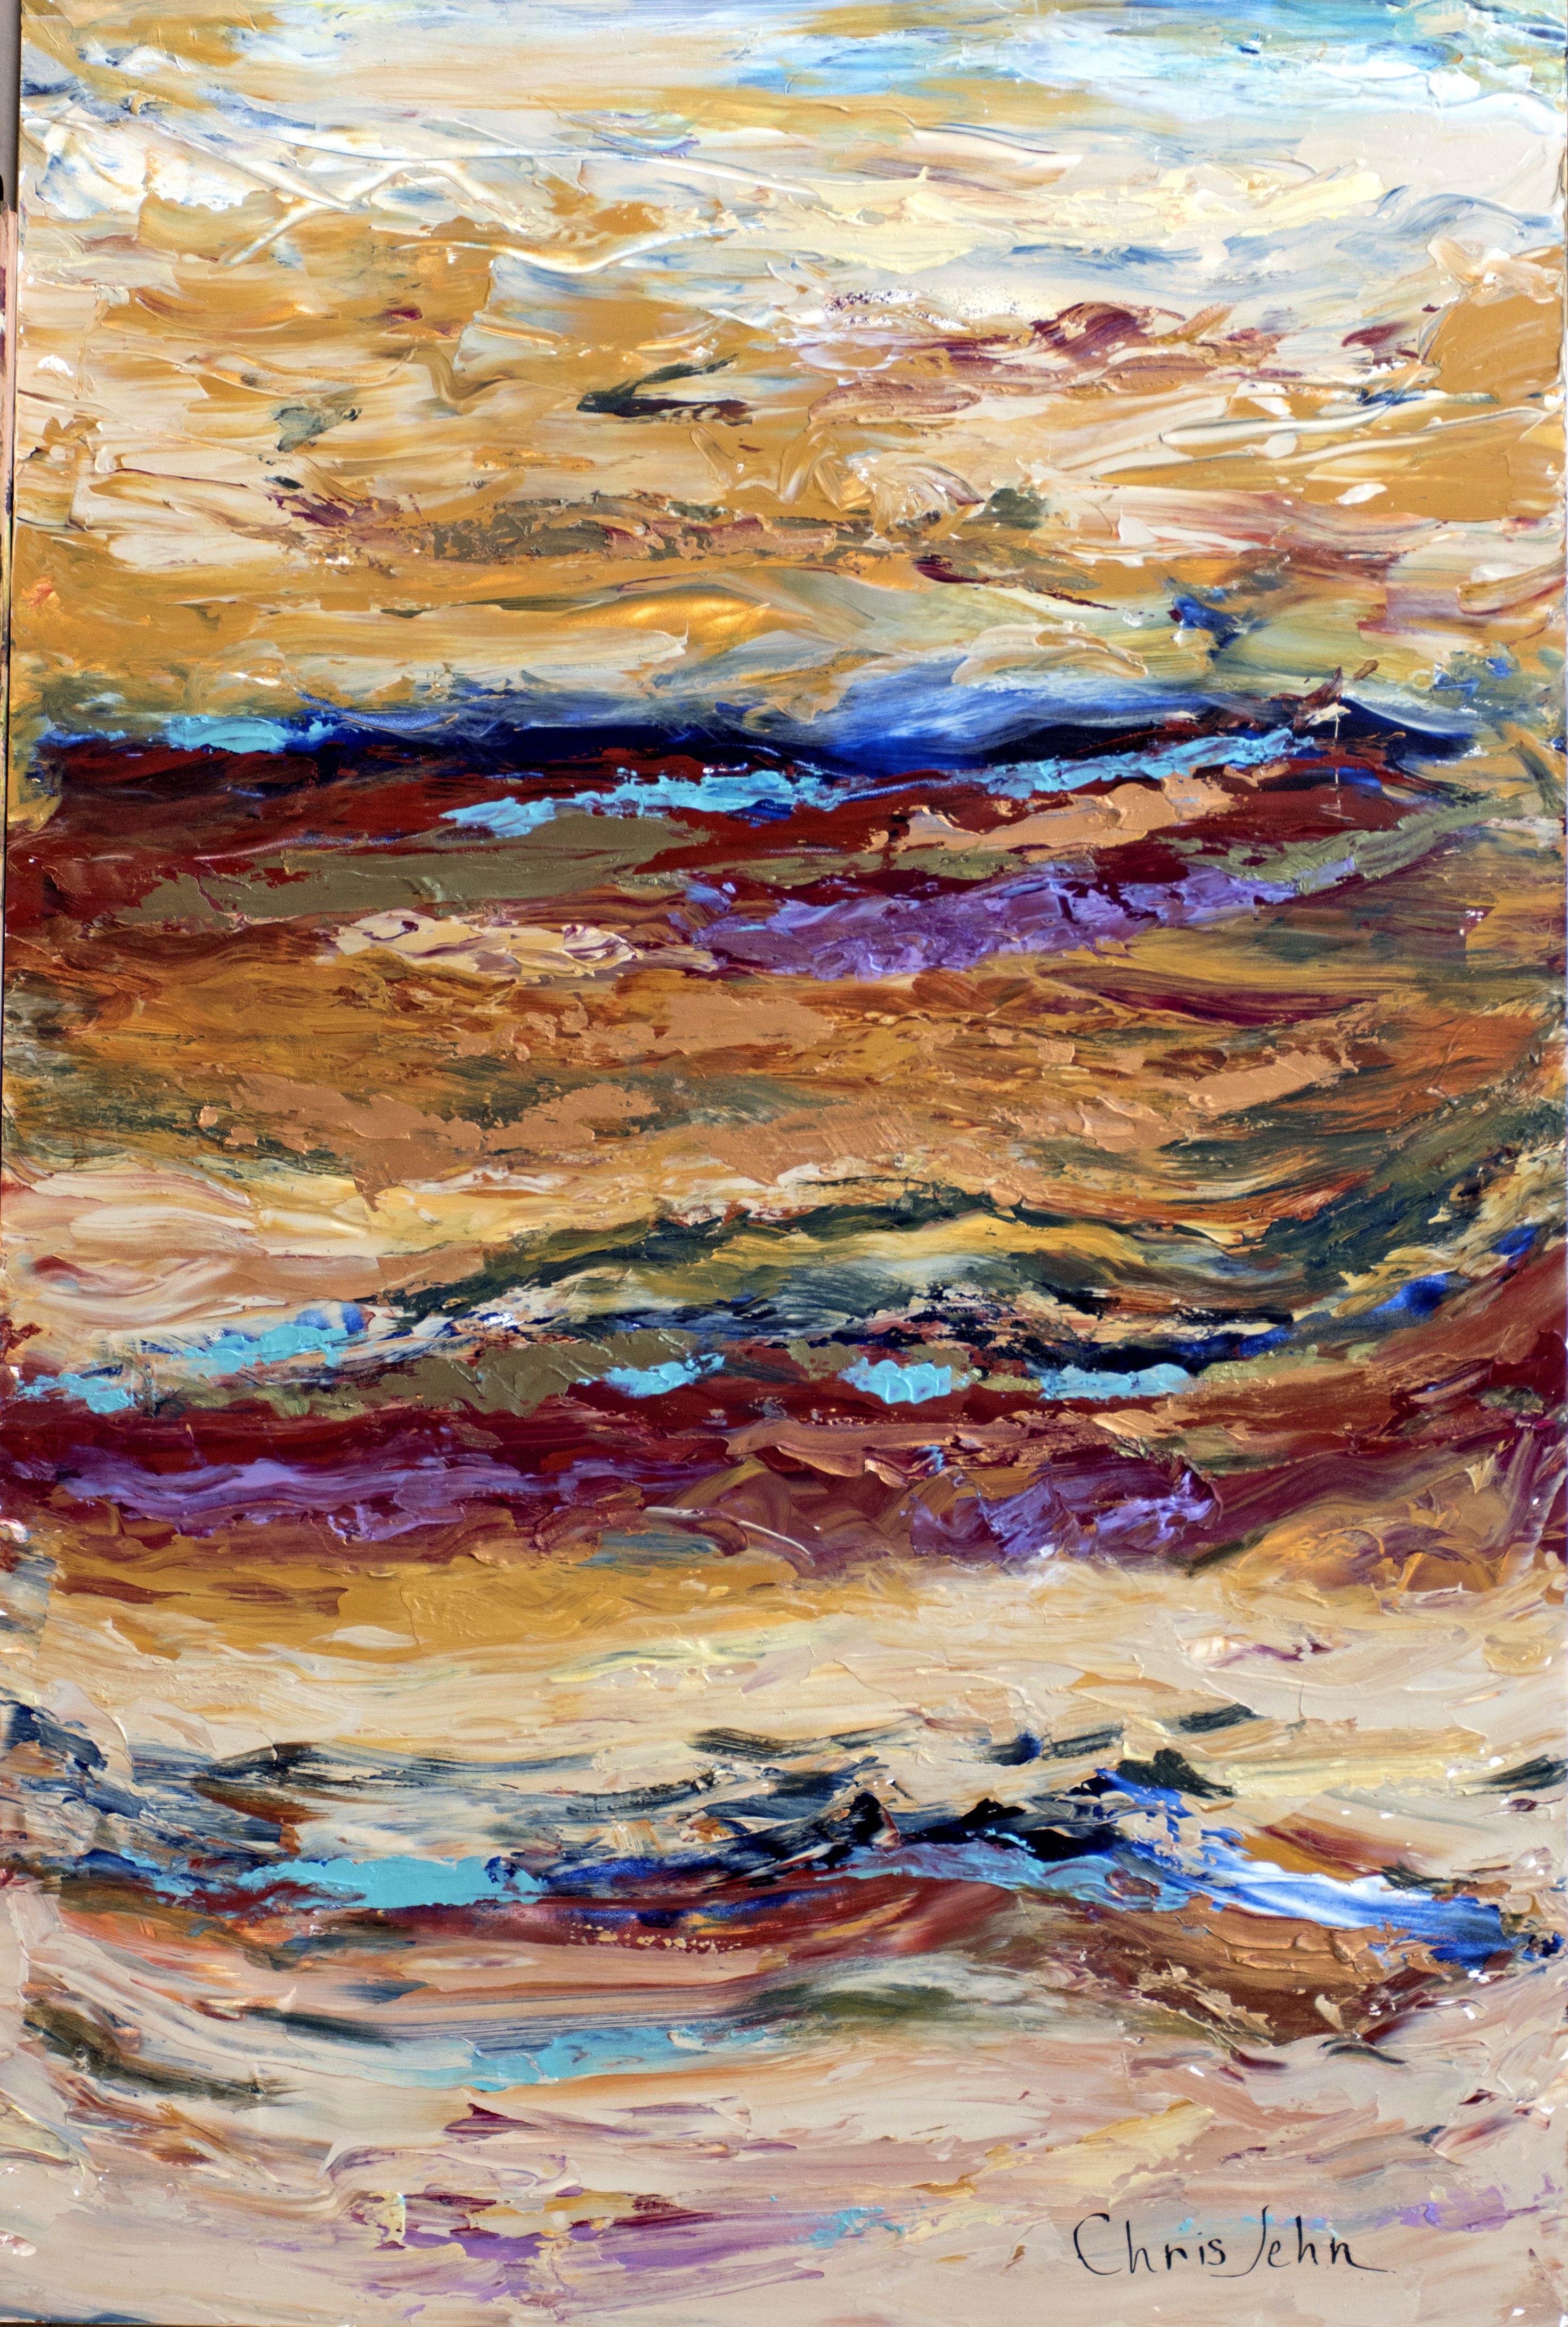 Chris Jehn: 'colorful sandstone', 2017 Acrylic Painting, Abstract Landscape. Inspiration for this piece was a piece of sandstone, the shapes were interesting.  From there I added complementary colors and texture.  Painted on an art panel wood board, 2sides.  Original work by Chris Jehn...